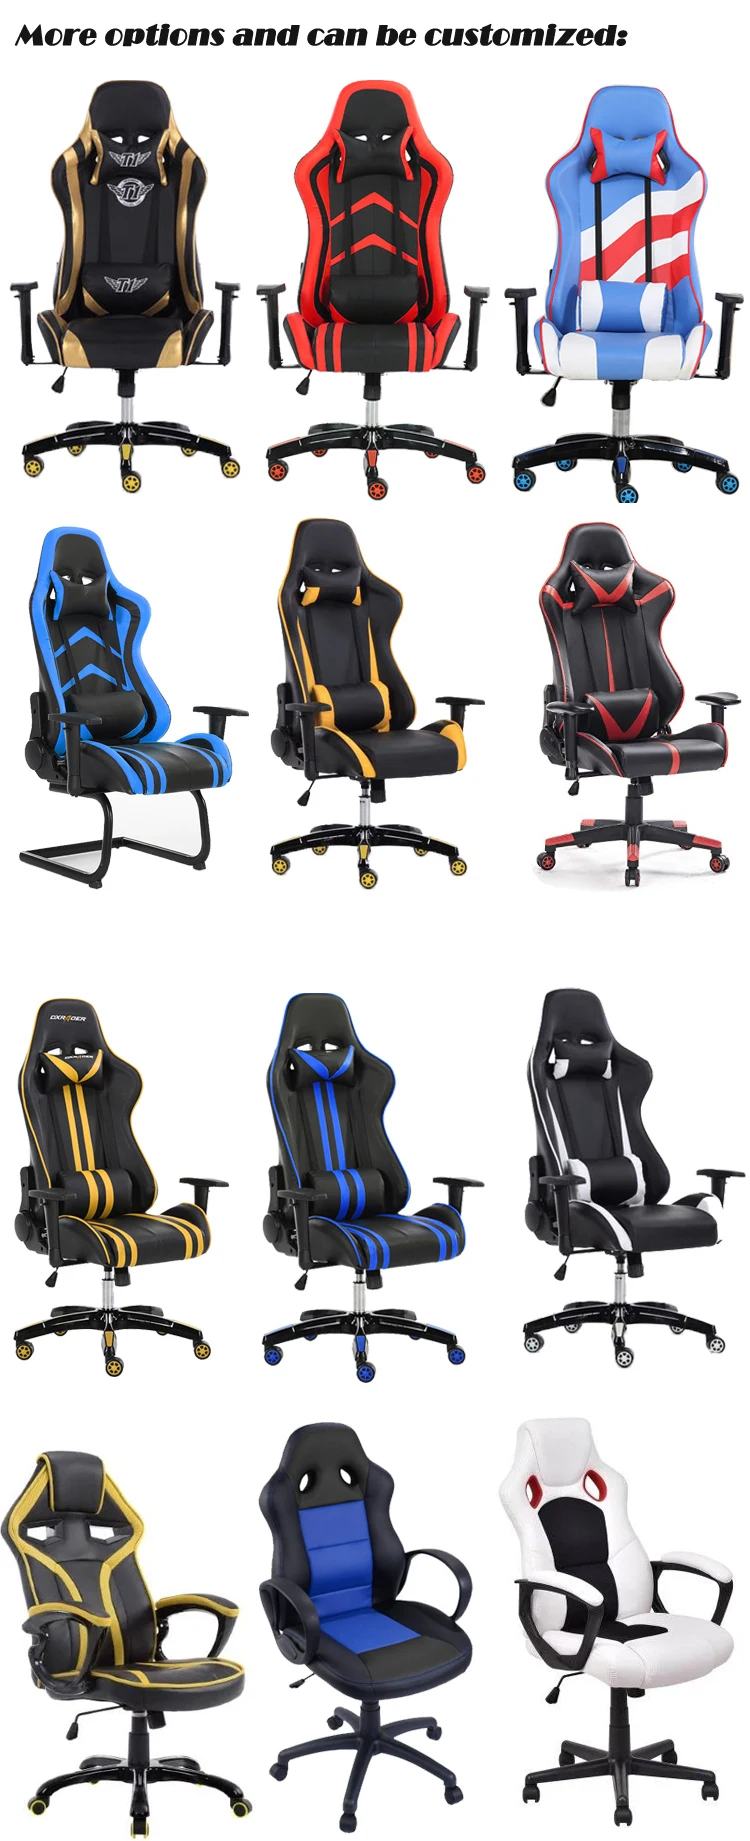 Purchase Tv Xbox 360 Office Best Cheap Pc Gaming Chair Cheap For Sale From Best Gaming Chair Factory Selling Custom Made Brands Buy Gaming Ground Chair Gaming Desk Chair Cheap Computer